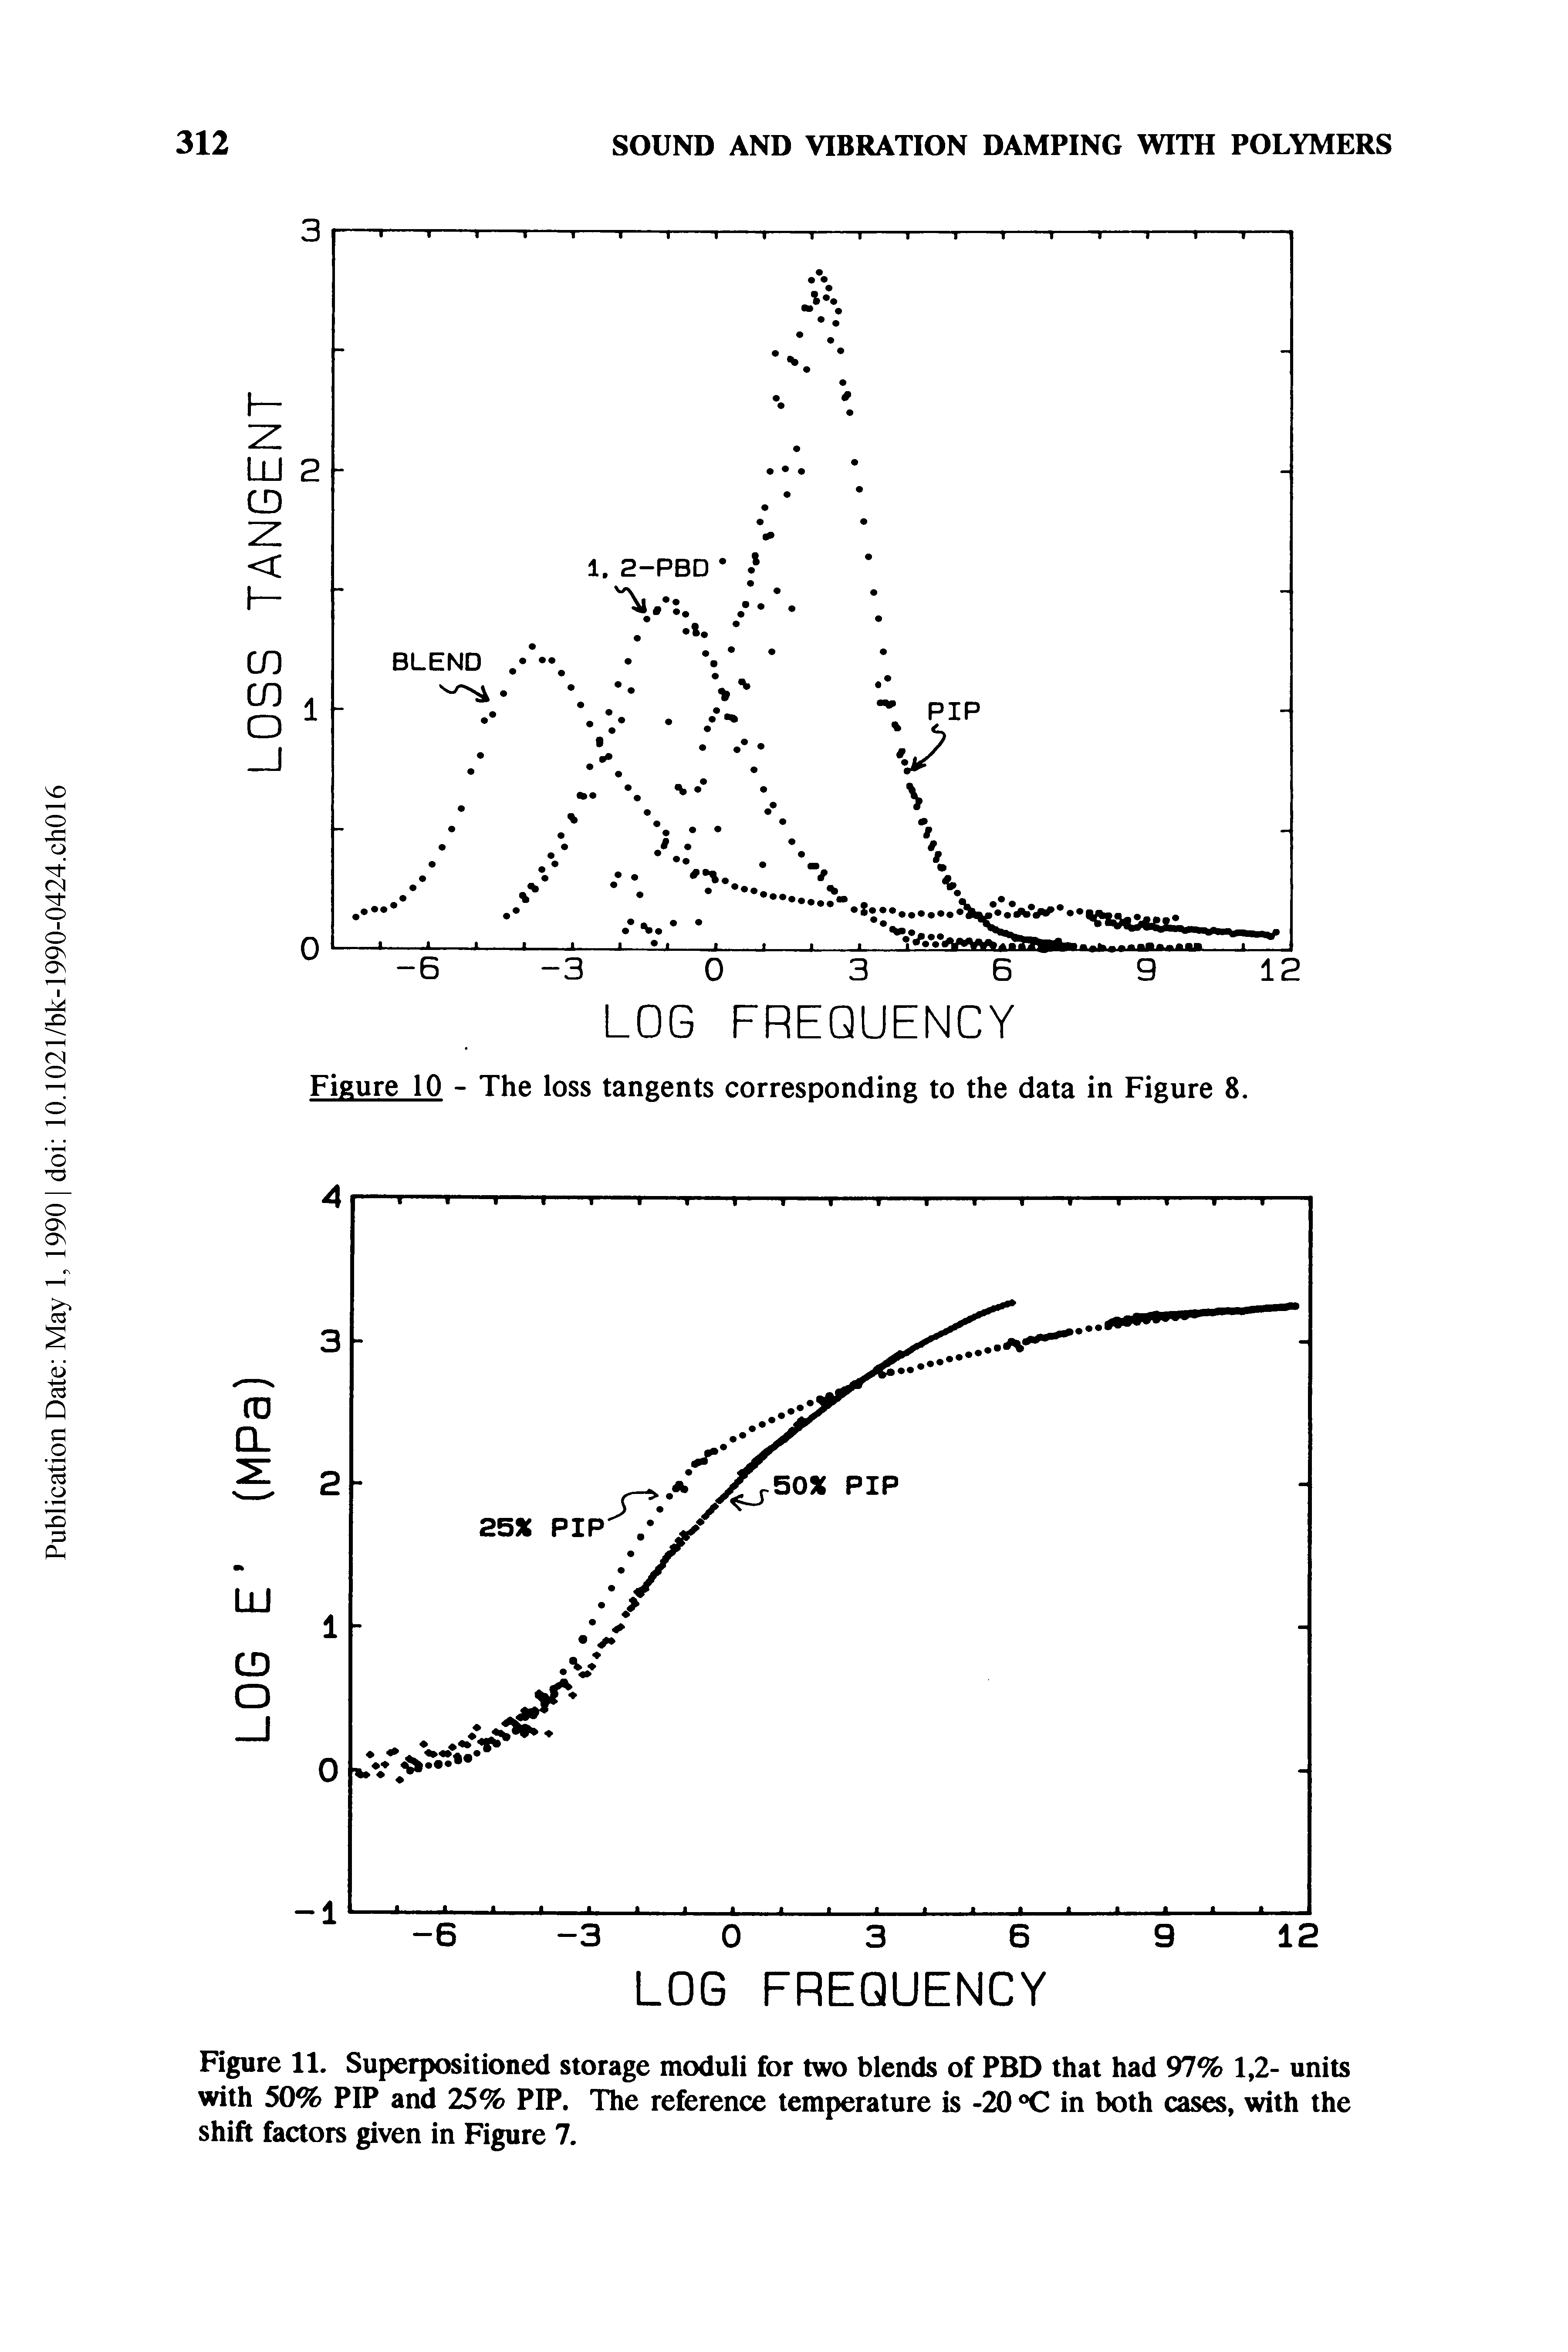 Figure 11. Superpositioned storage moduli for two blends of PBD that had 97% 1,2- units with 50% PIP and 25% PIP. The reference temperature is -20 C in both cases, with the shift factors given in Figure 7.